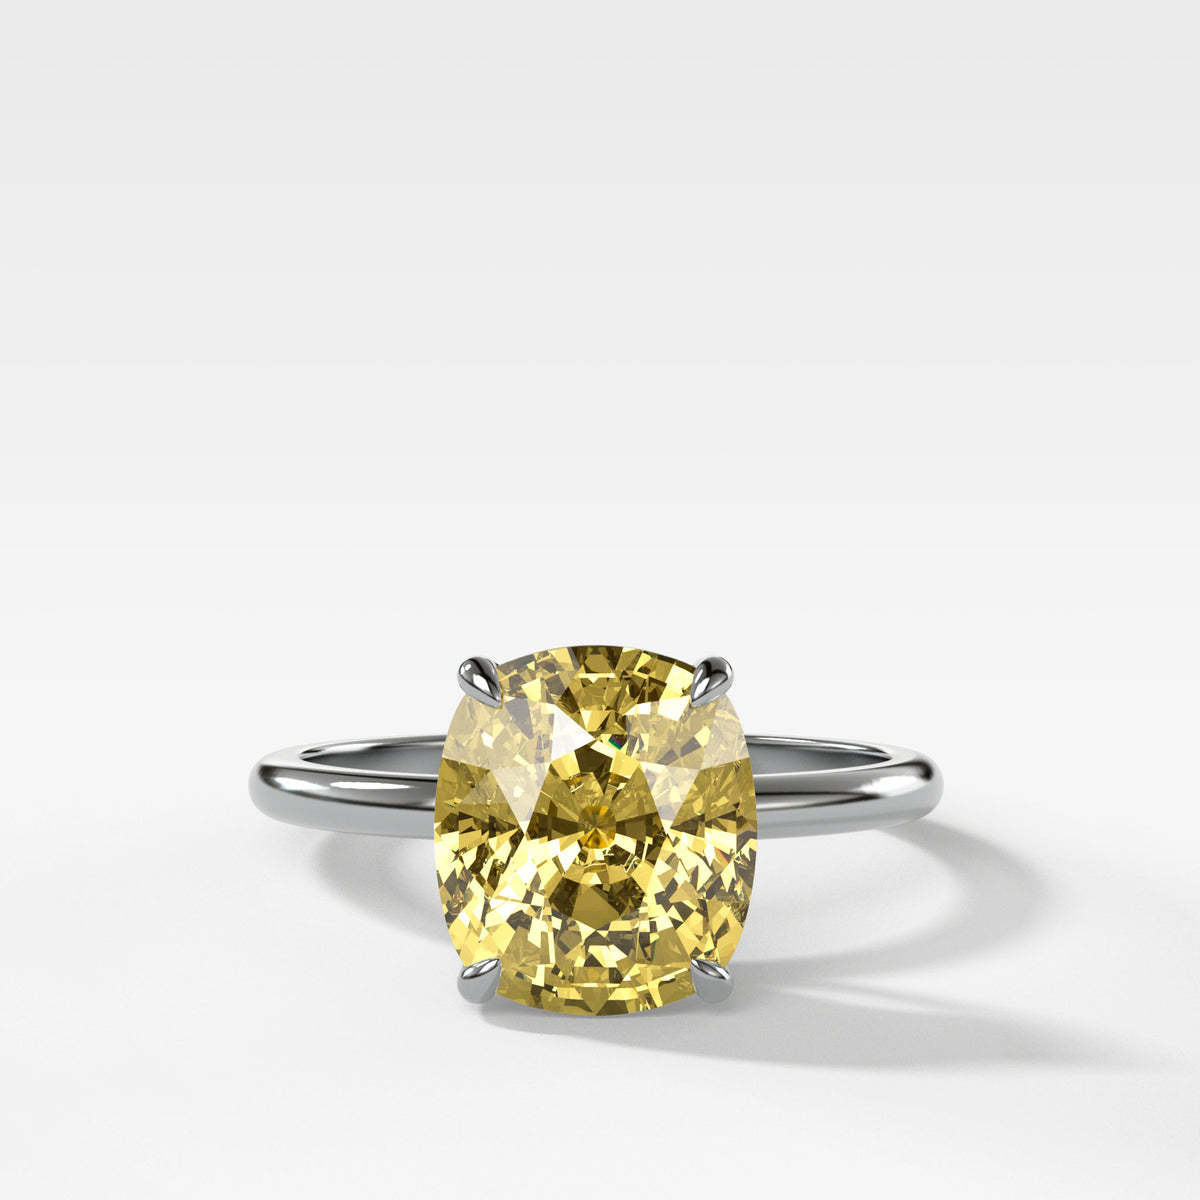 Thin + Simple Solitaire Engagement Ring With Canary Yellow Elongated Cushion Cut Diamond